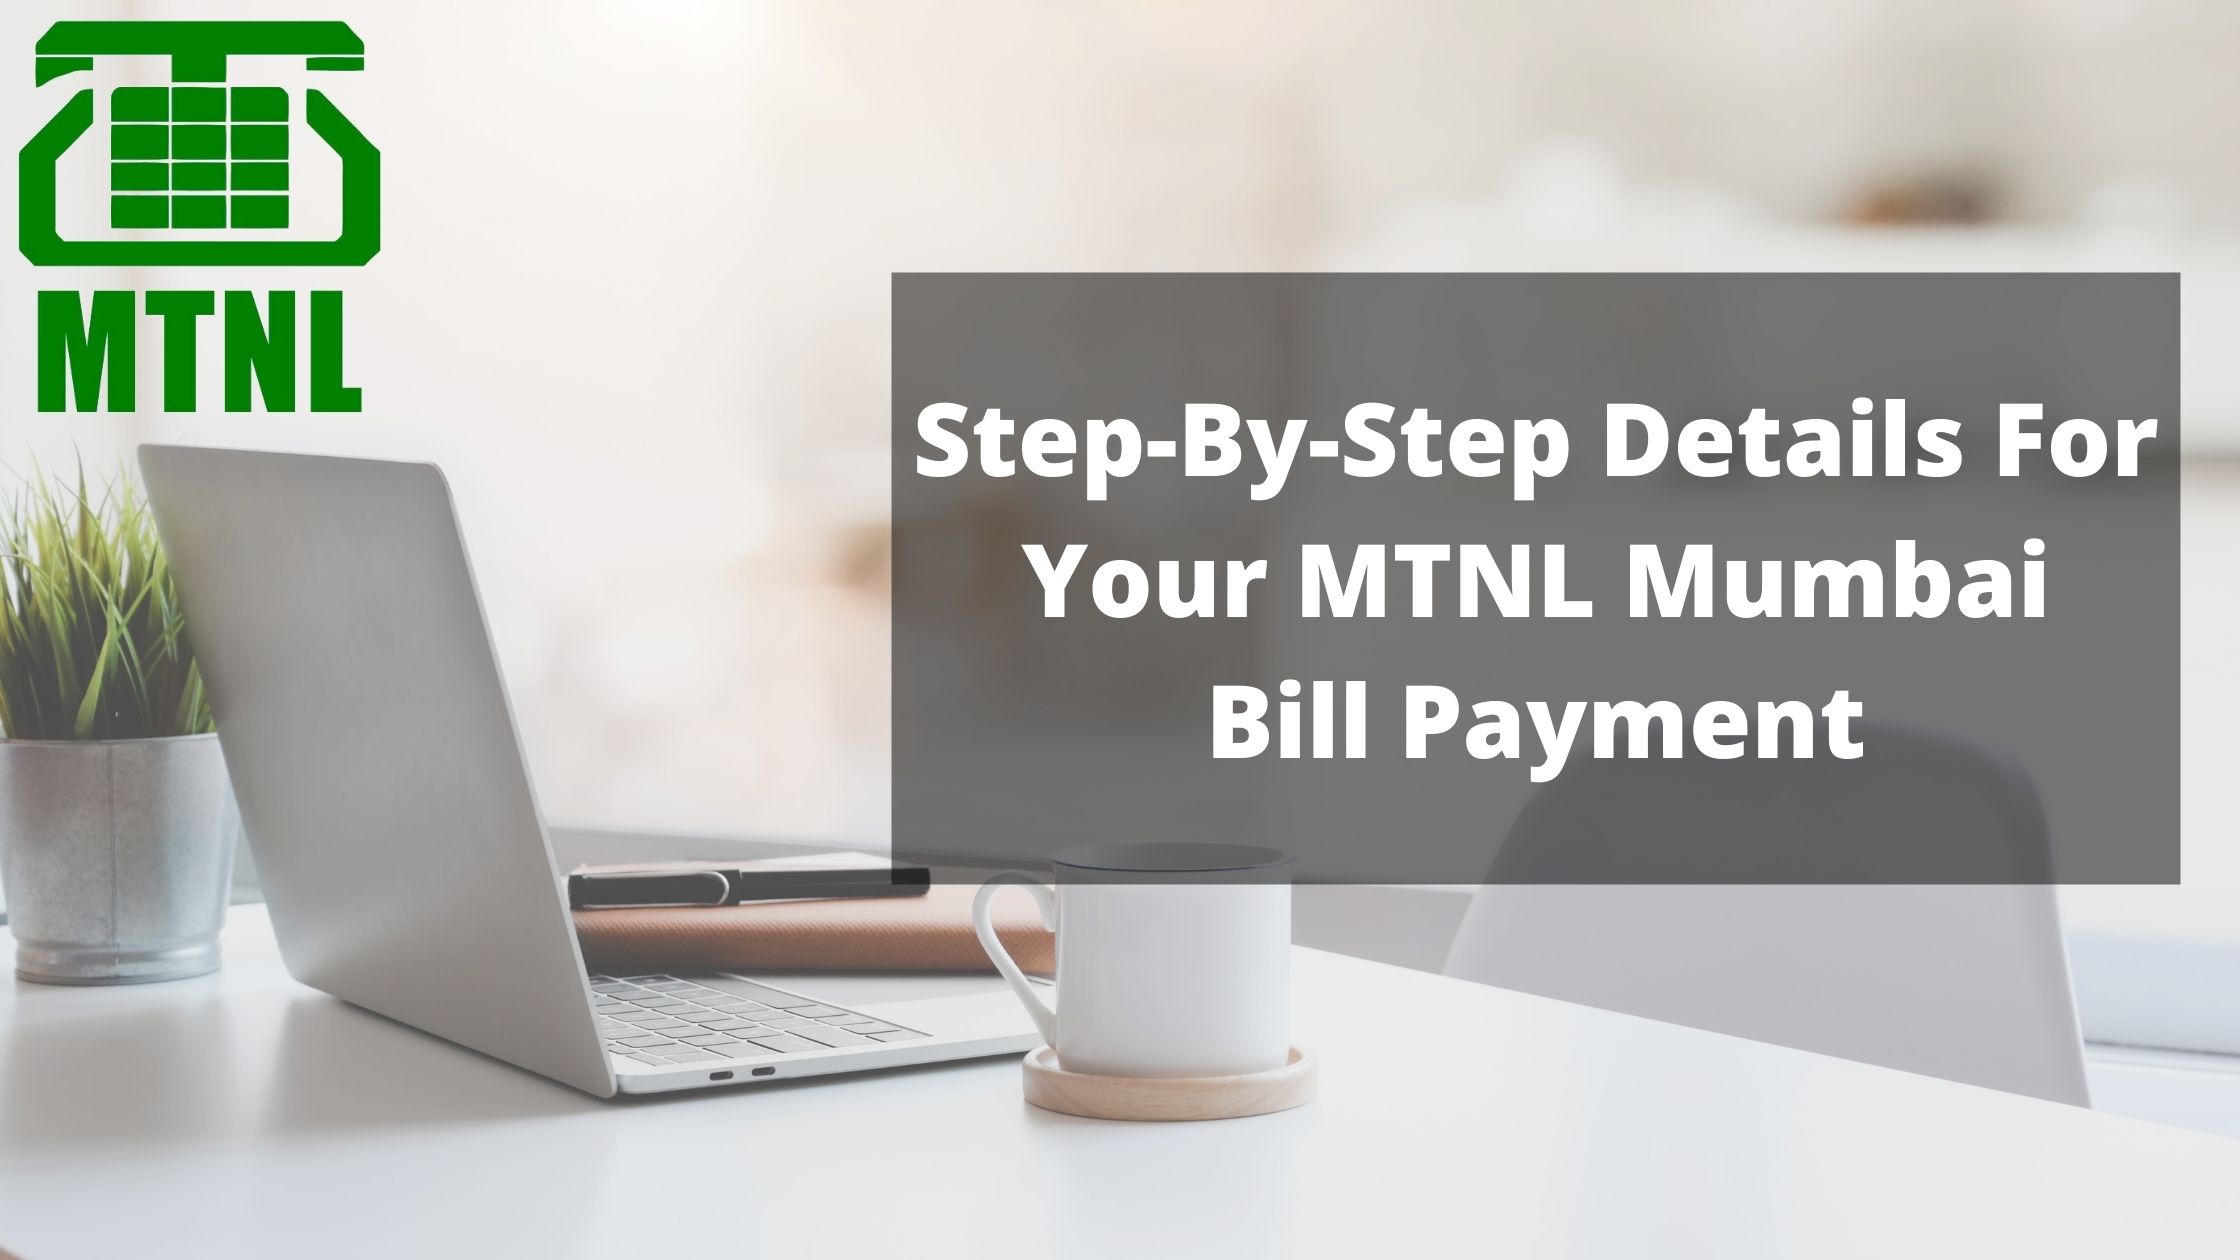  Step-By-Step Details for Your MTNL Mumbai Bill Payment